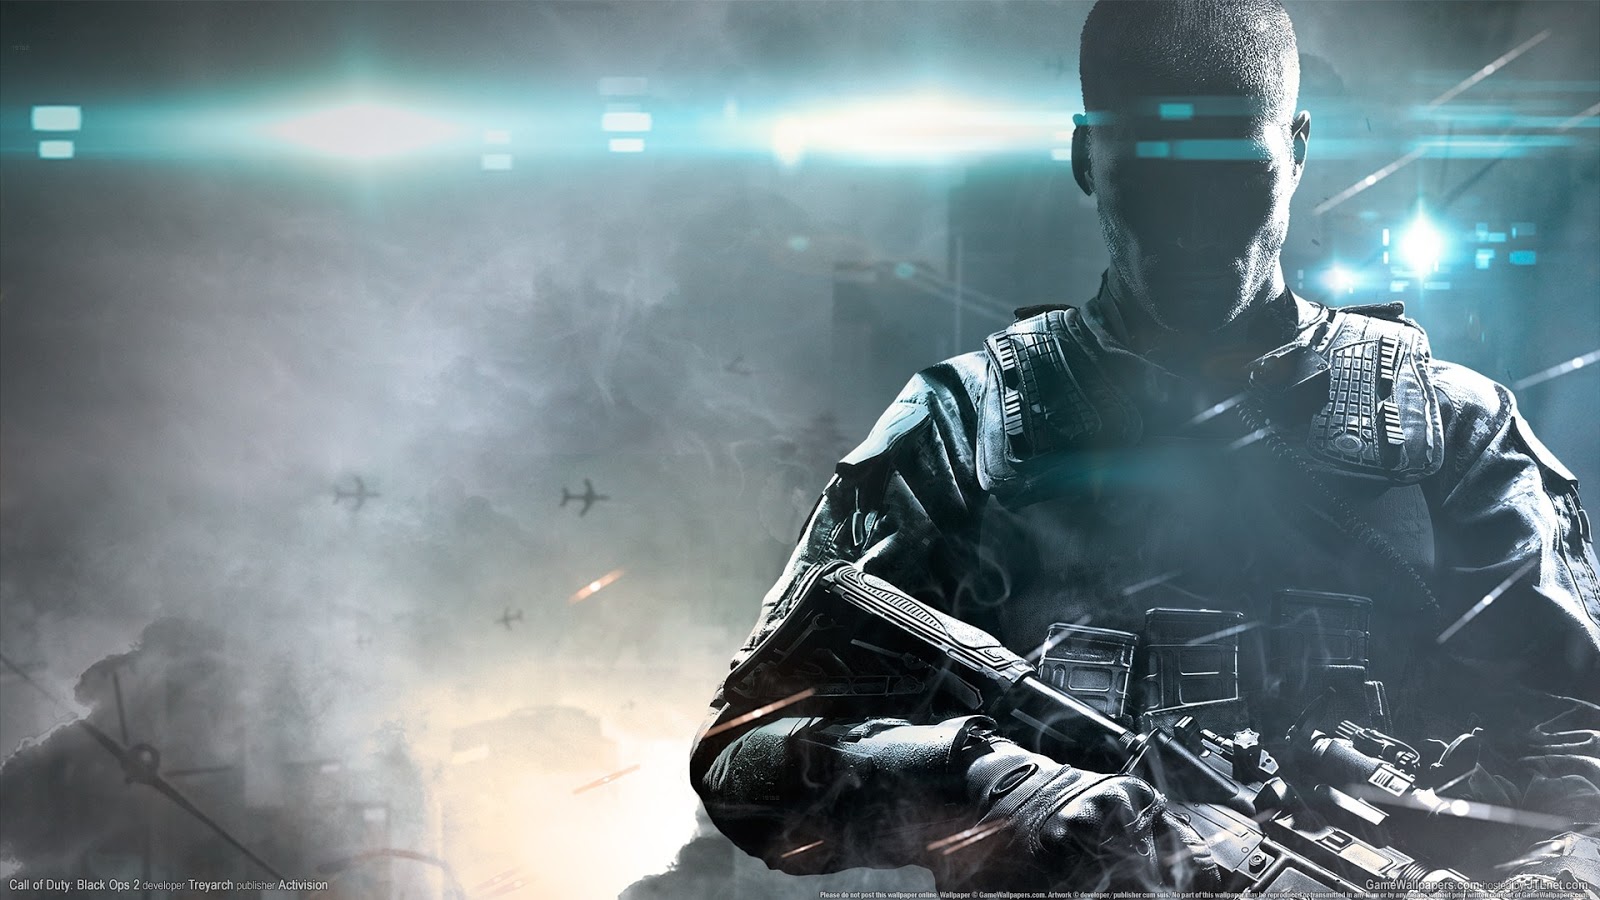 Of Duty Black Ops Wallpaper Wallcovers In High Quality